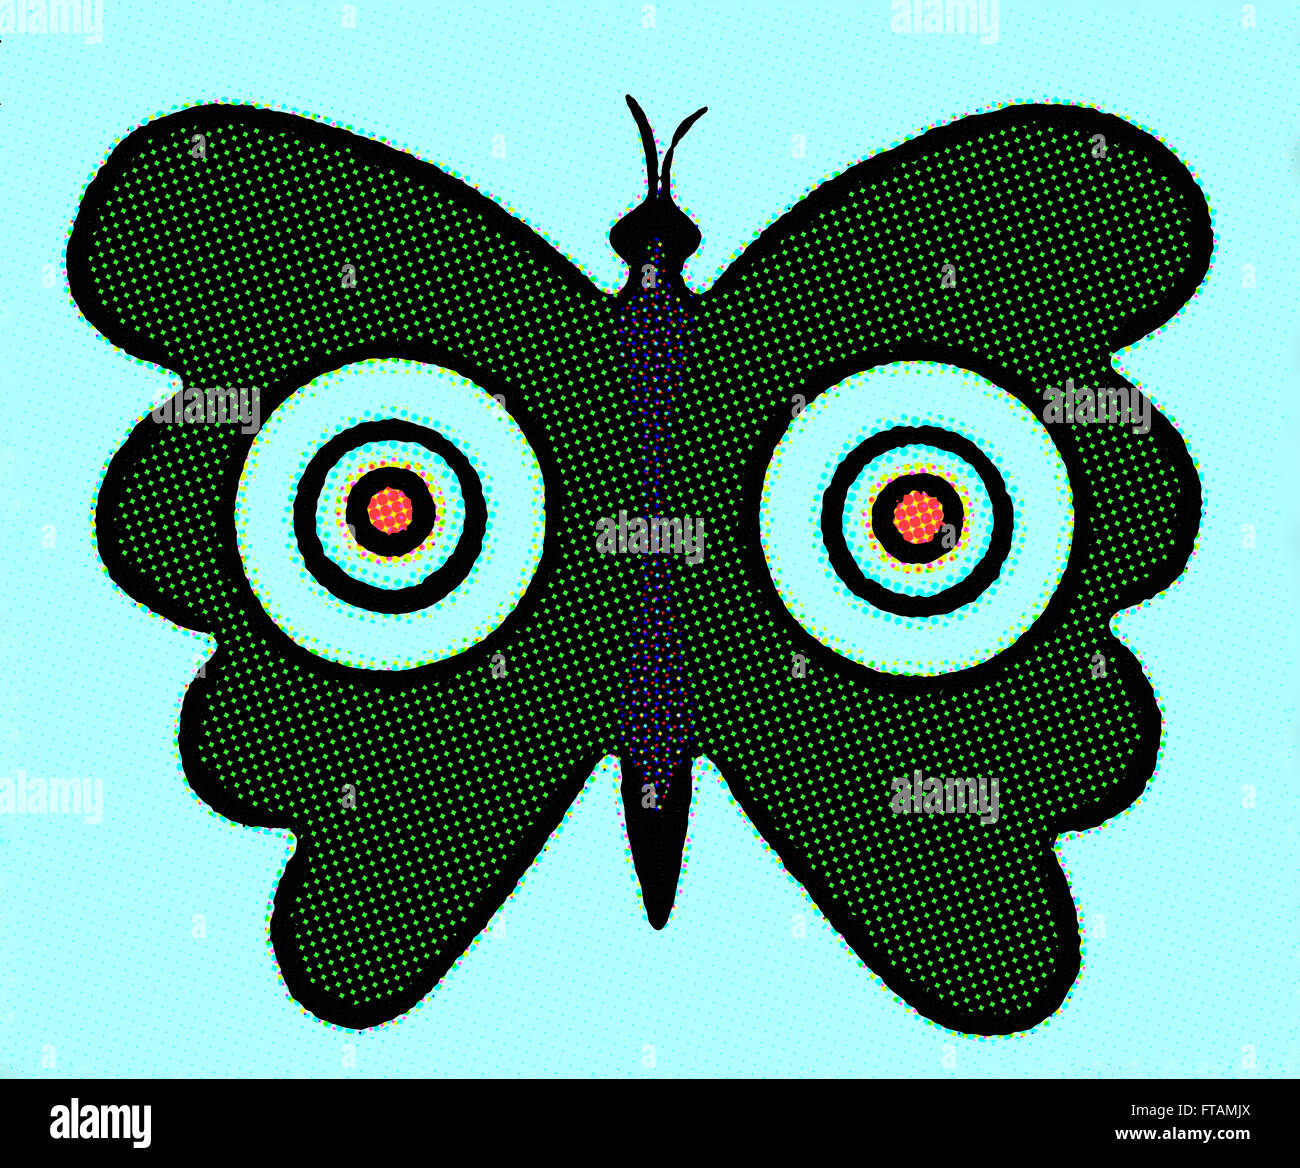 Dark silhouette of  butterfly with bulls eyes  target symbols in contemporary design illustration. Stock Photo